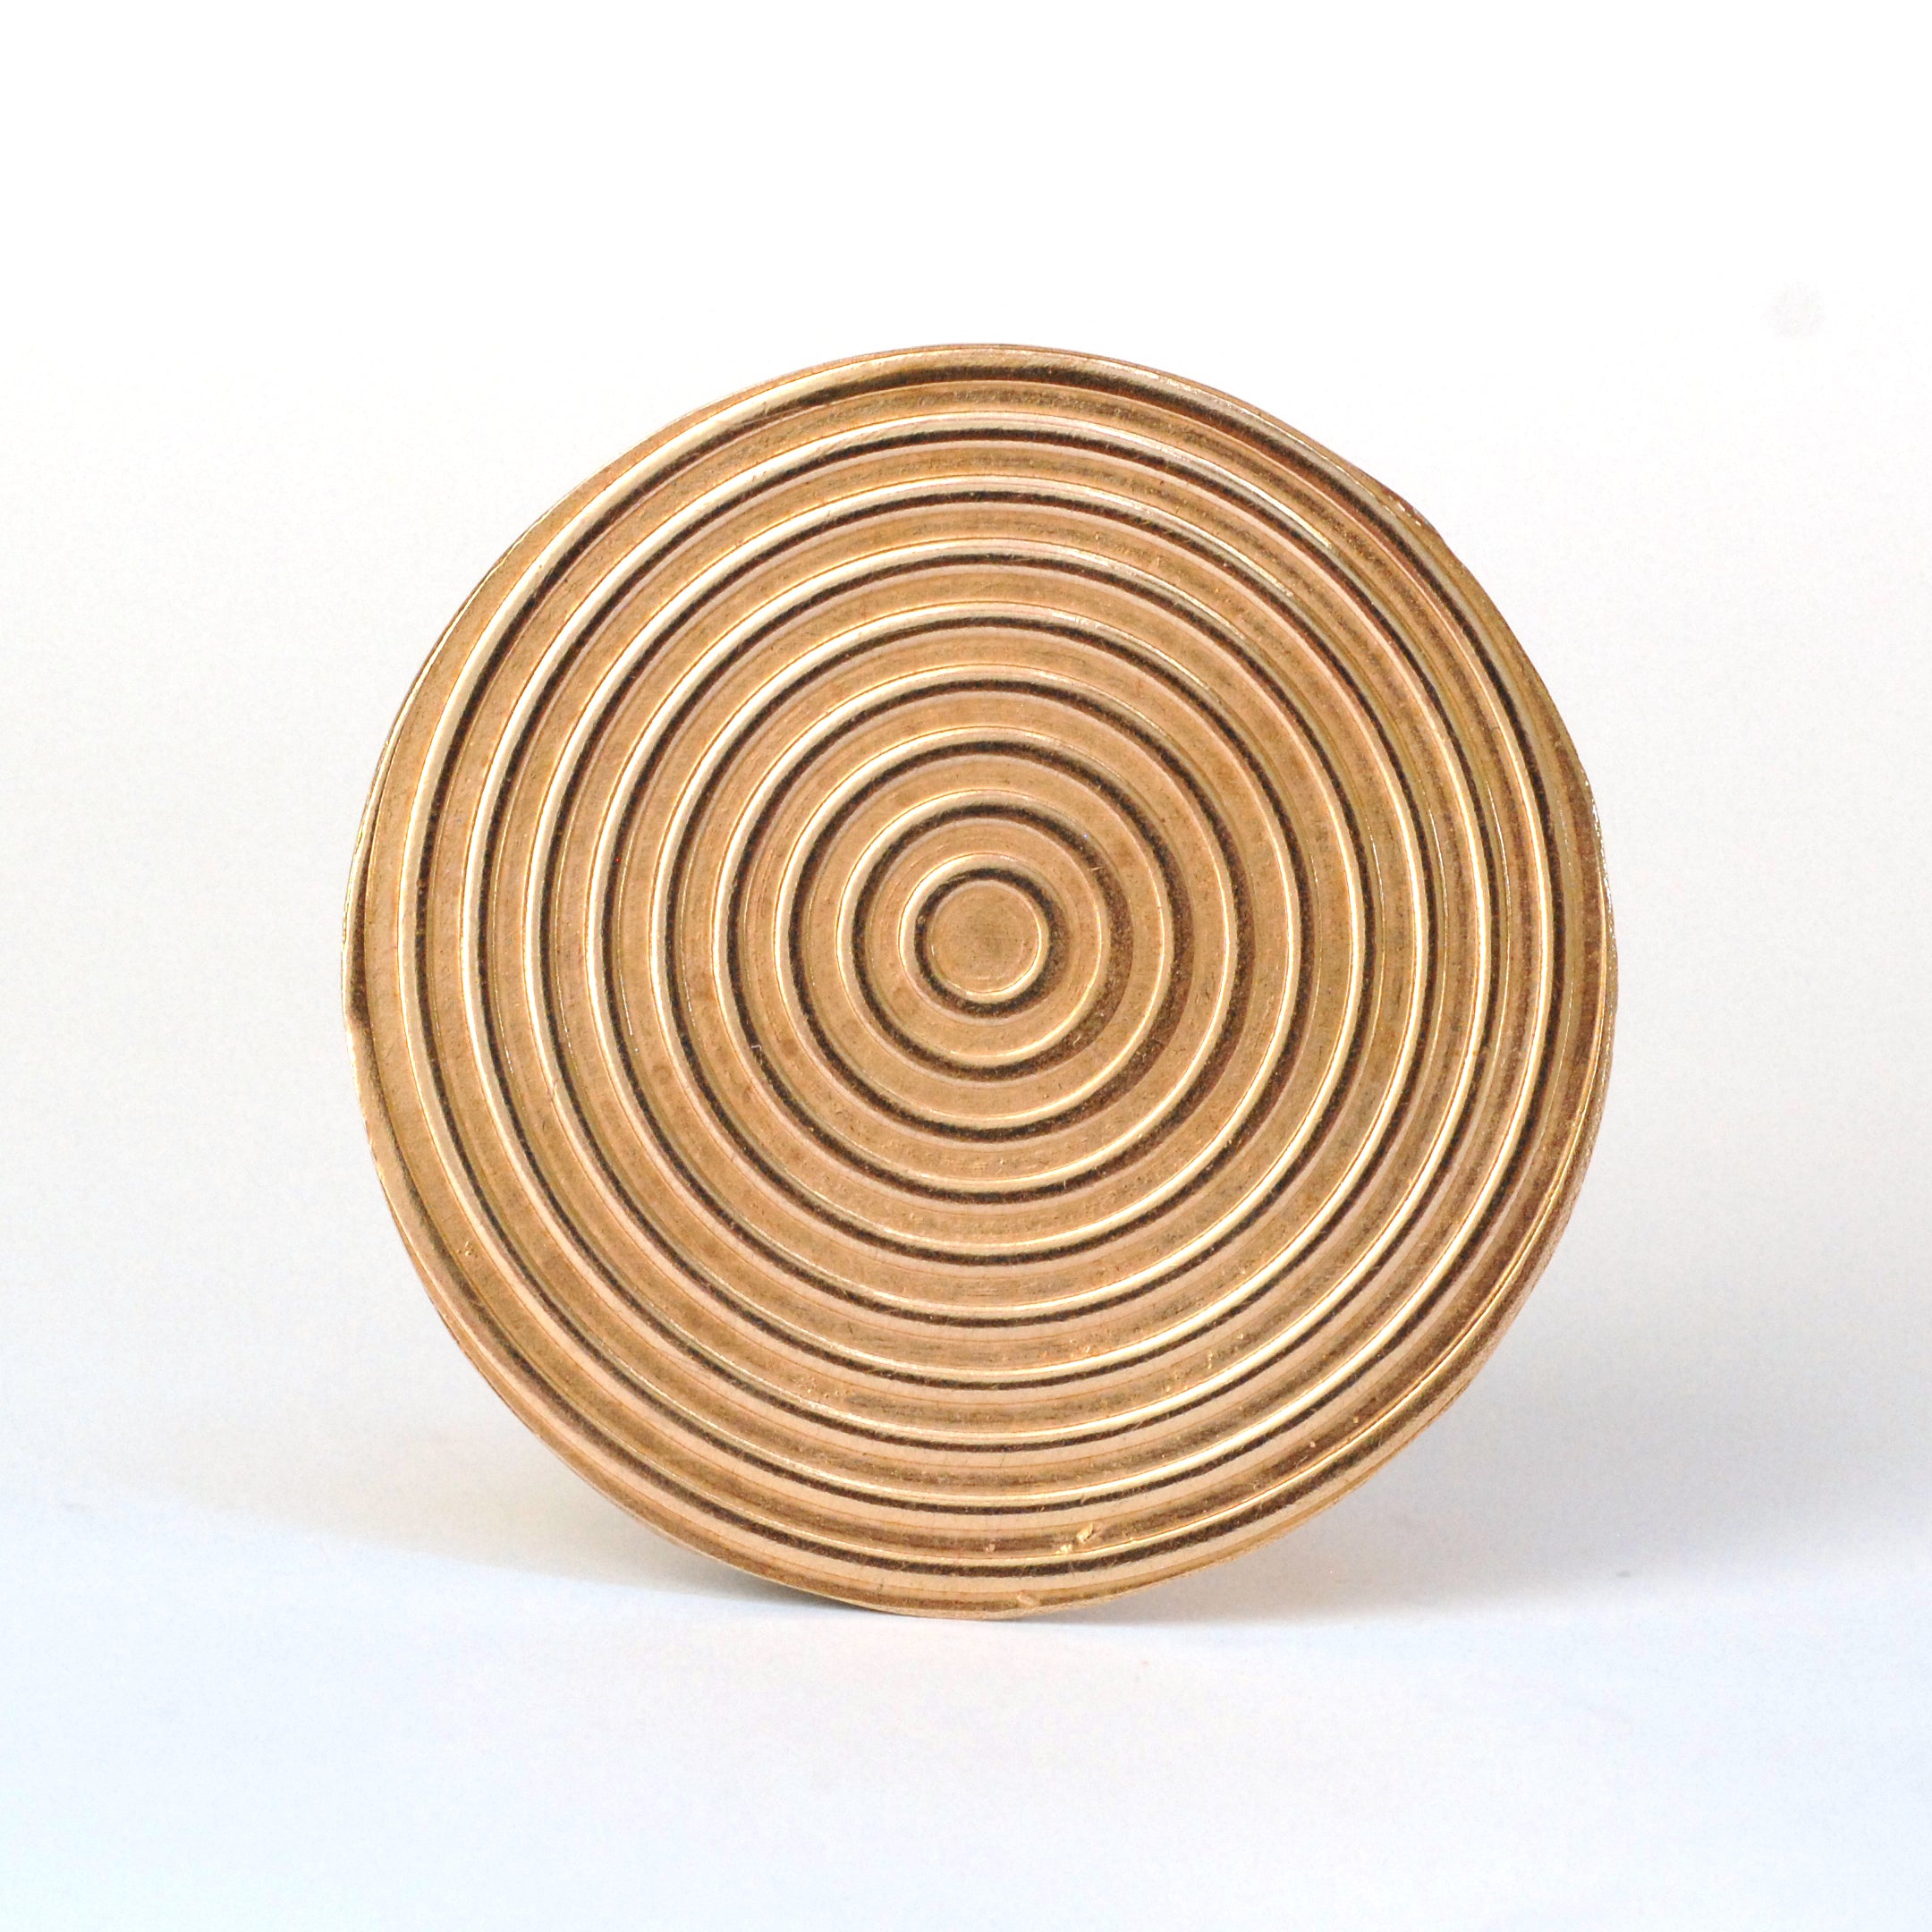 Concentric circle pattern 40mm round Disc Blank